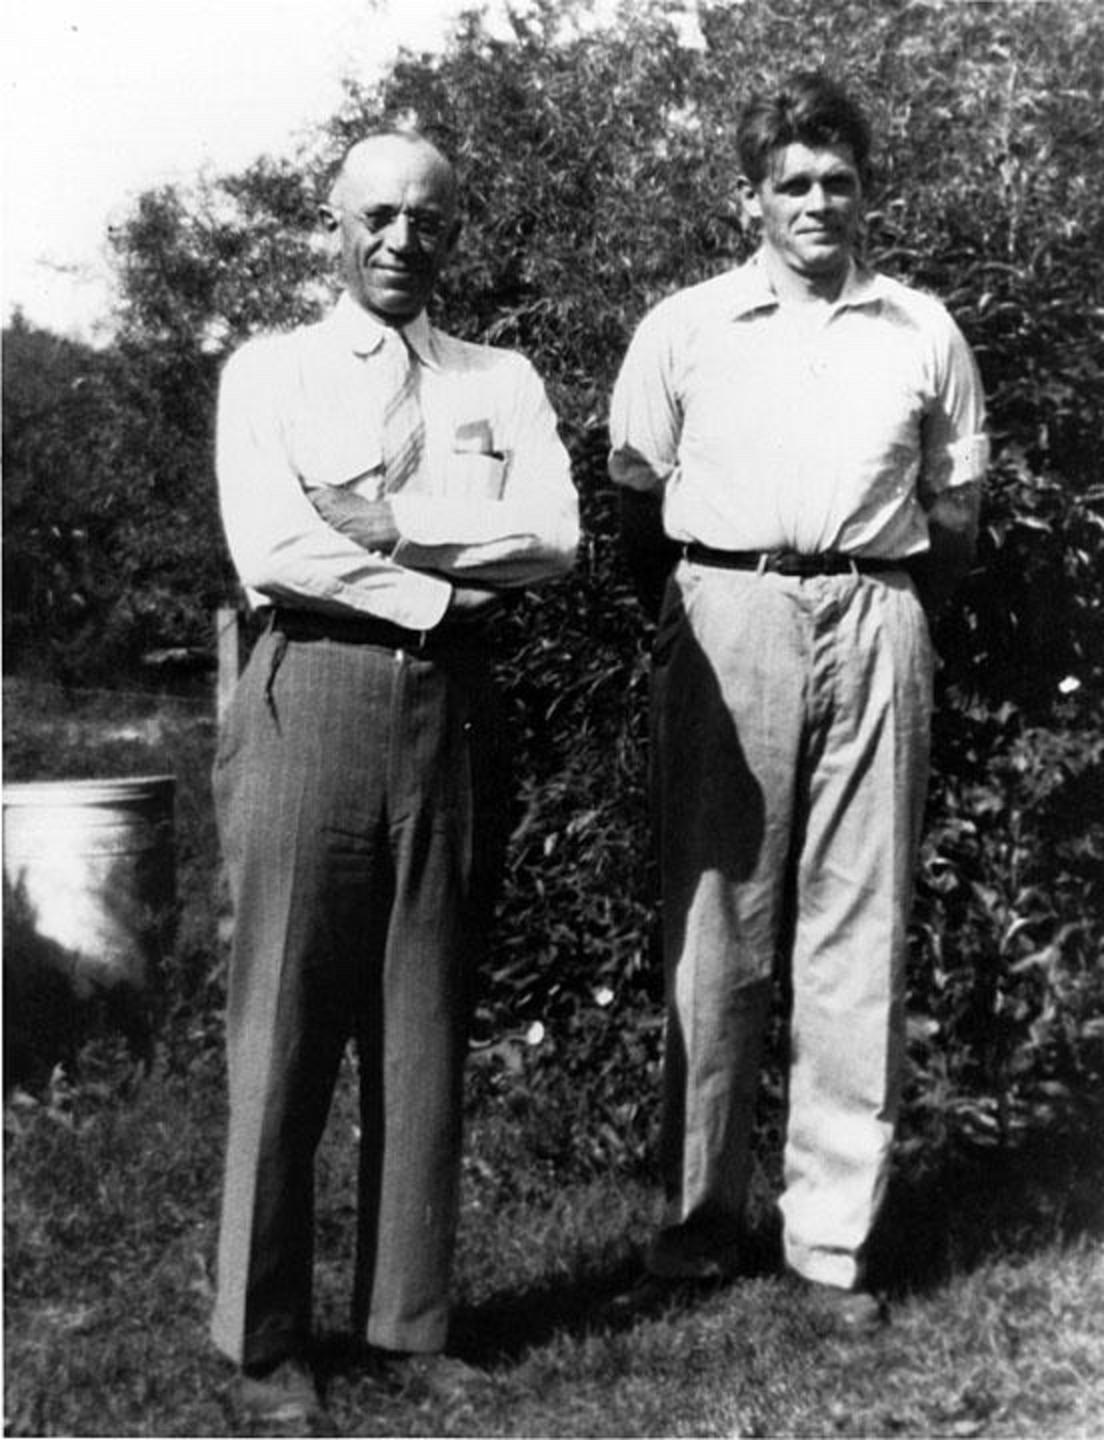 Aldo Leopold, left, and H. Albert Hochbaum. Hochbaum (1911-1988) was one of several Leopold students who went on to distinguish themselves in different realms of ecology, setting the stage, in fact, for the rise of modern conservation biology.  They included Leopold's own children.  Hochbaum, a field researcher and artist, is noted for his insights about waterfowl, his work being used in campaigns to save wetlands from being drained and converted to crops or development.  Photo courtesy Aldo Leopold Foundation, (www.aldoleopold.org)